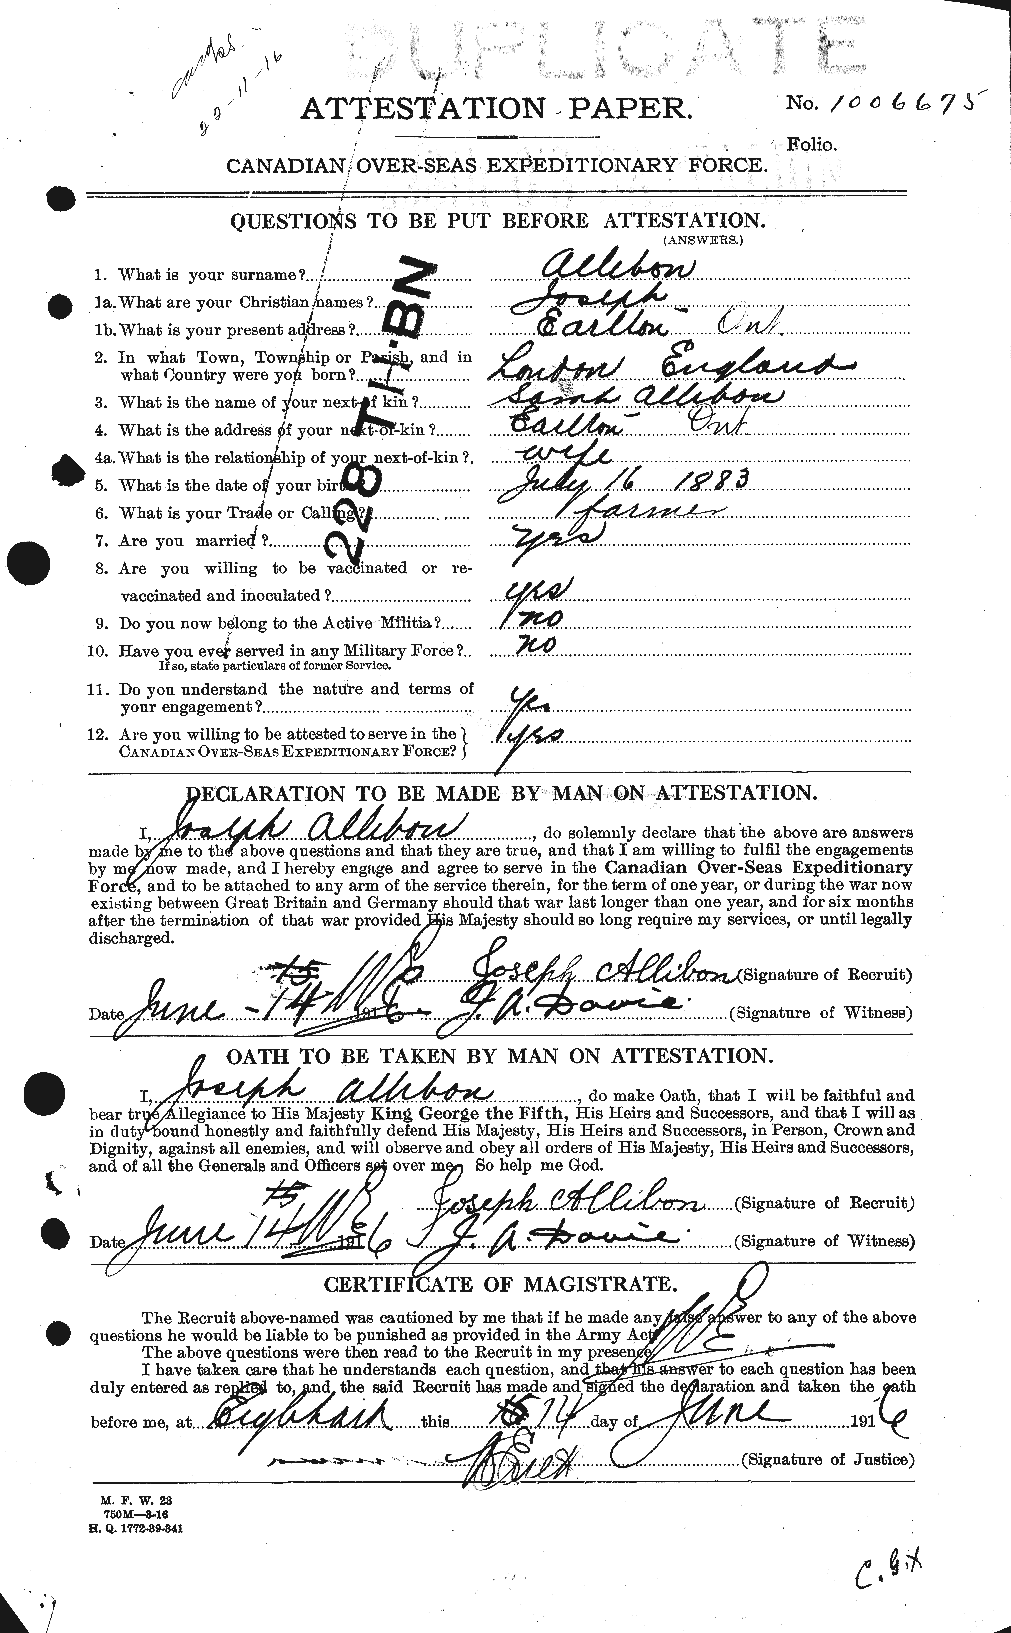 Personnel Records of the First World War - CEF 206757a